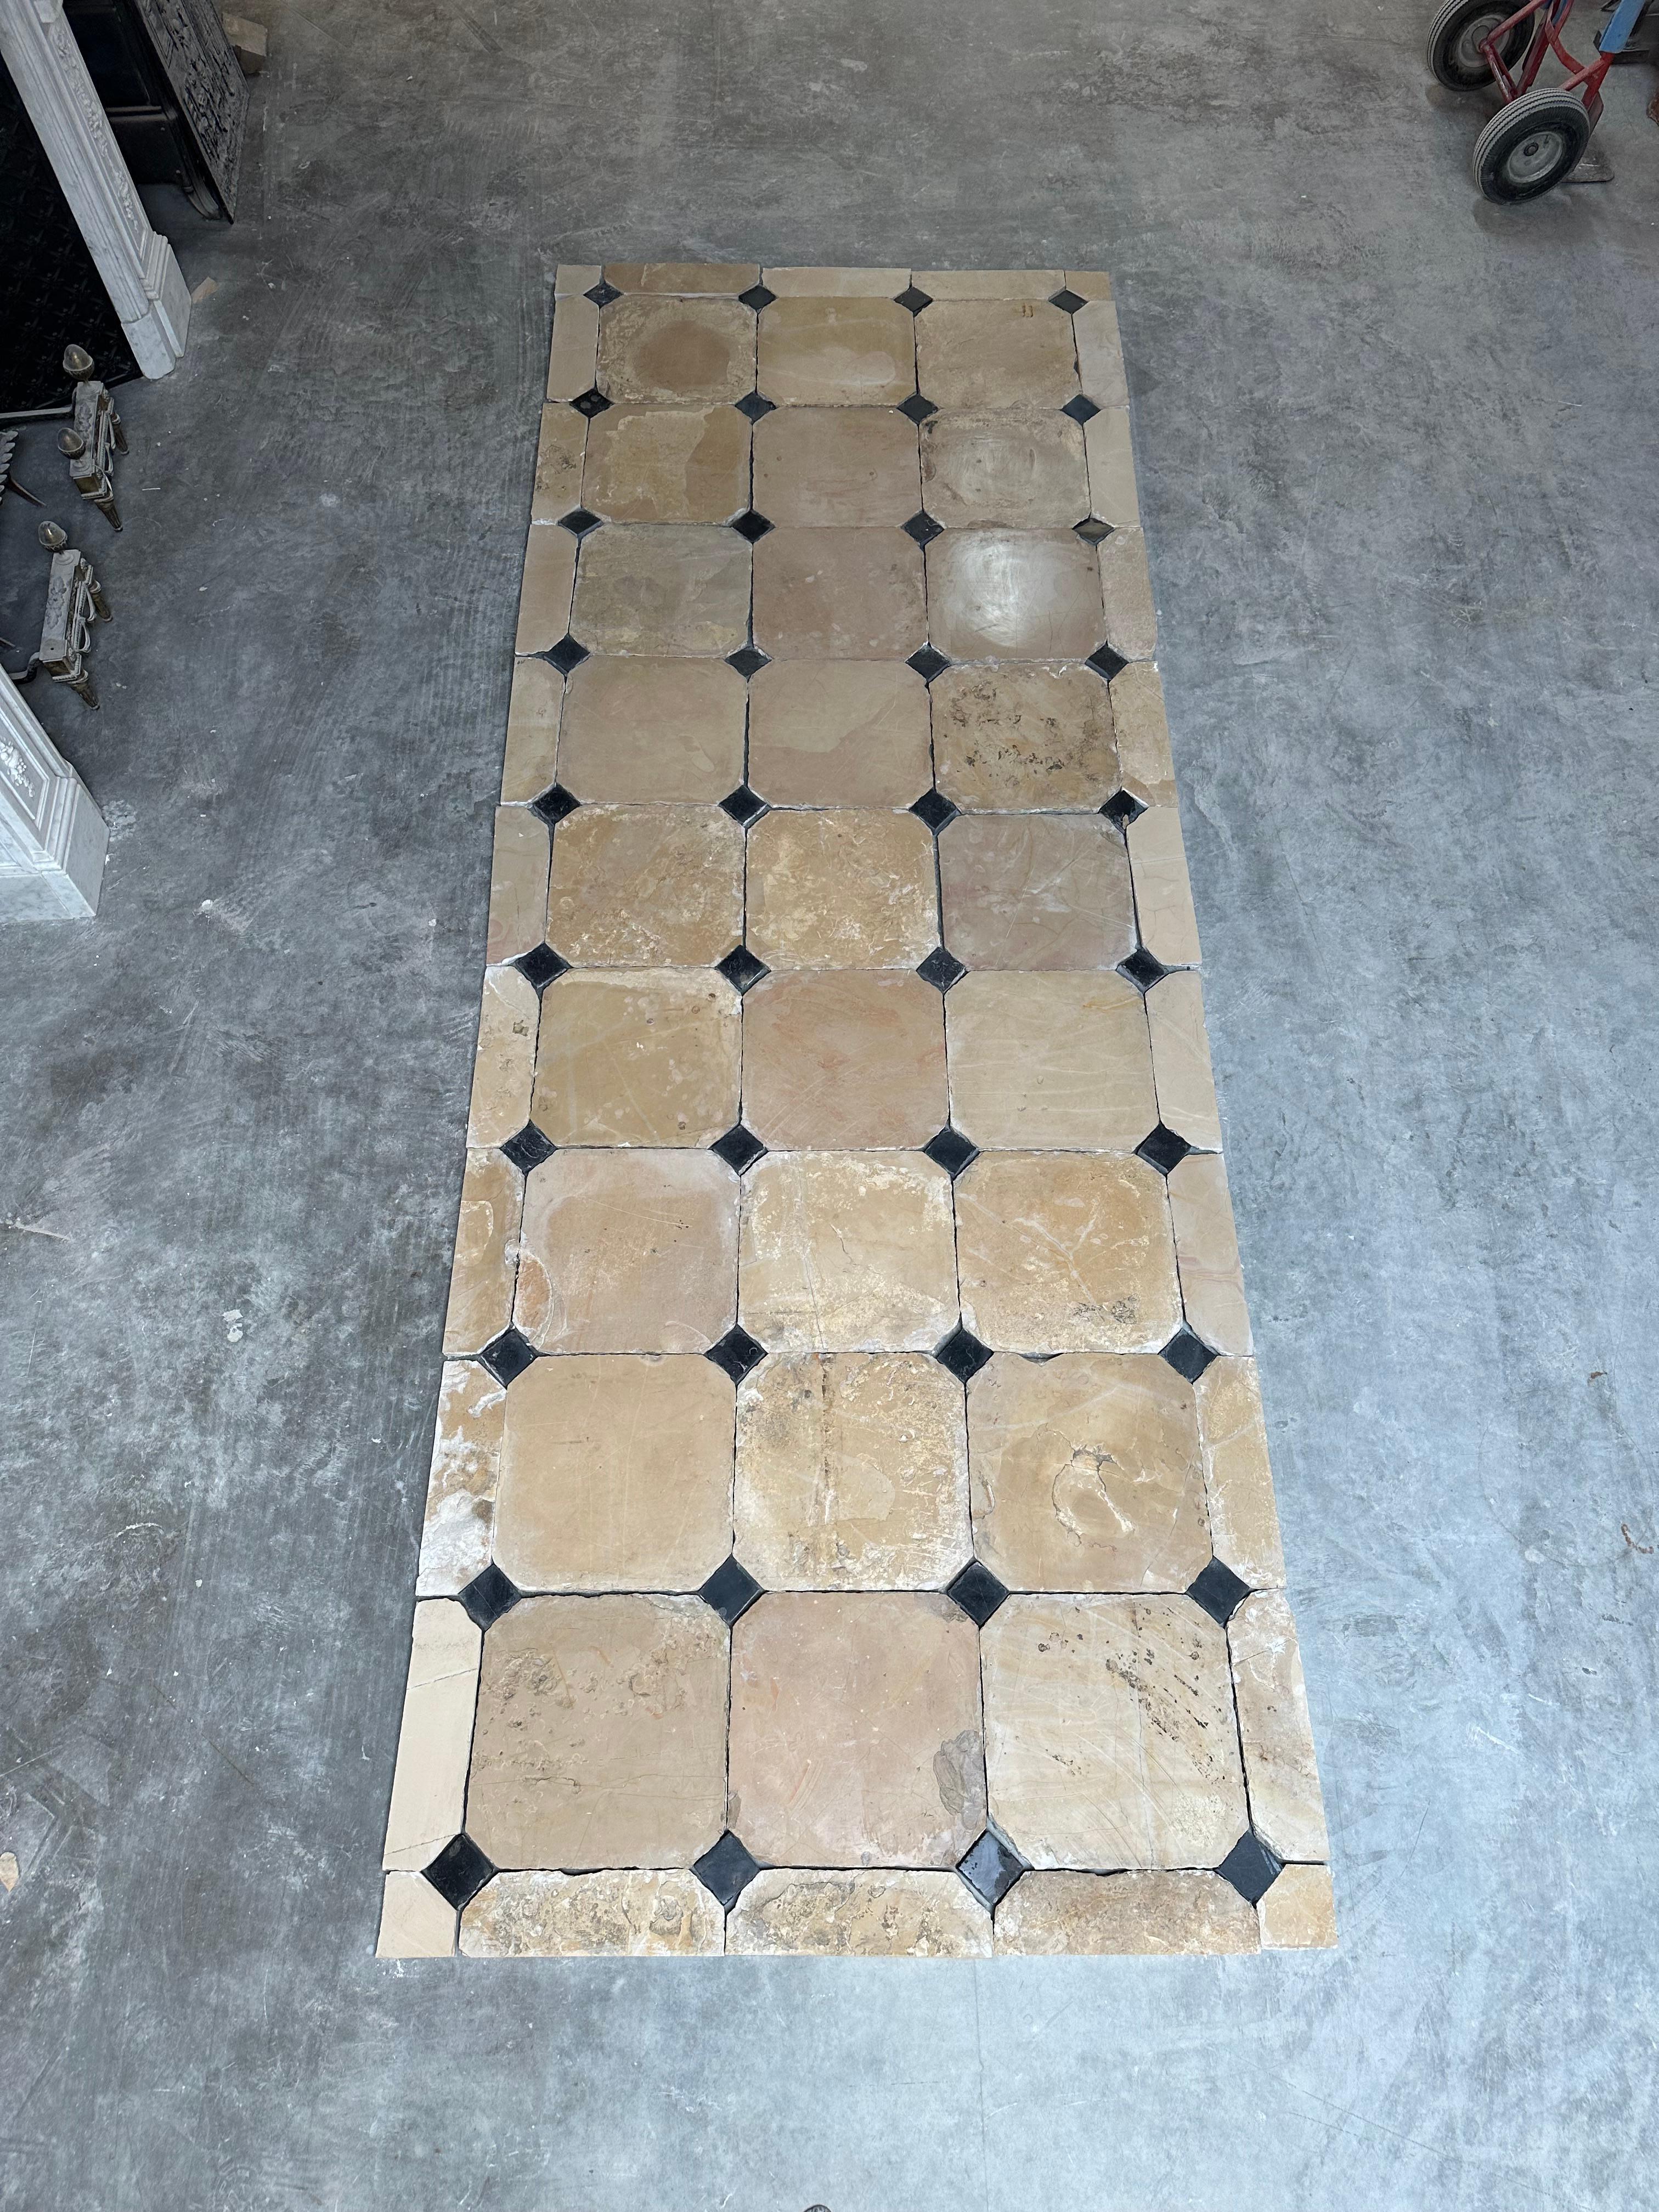 Happy to offer this beautiful French limestone cabochon floor.
This used to be the hallway between two room in a nice mansion in the Burgundy area in France.

Soft and warm colored limestone tiles show perfect imperfections that make these floors so